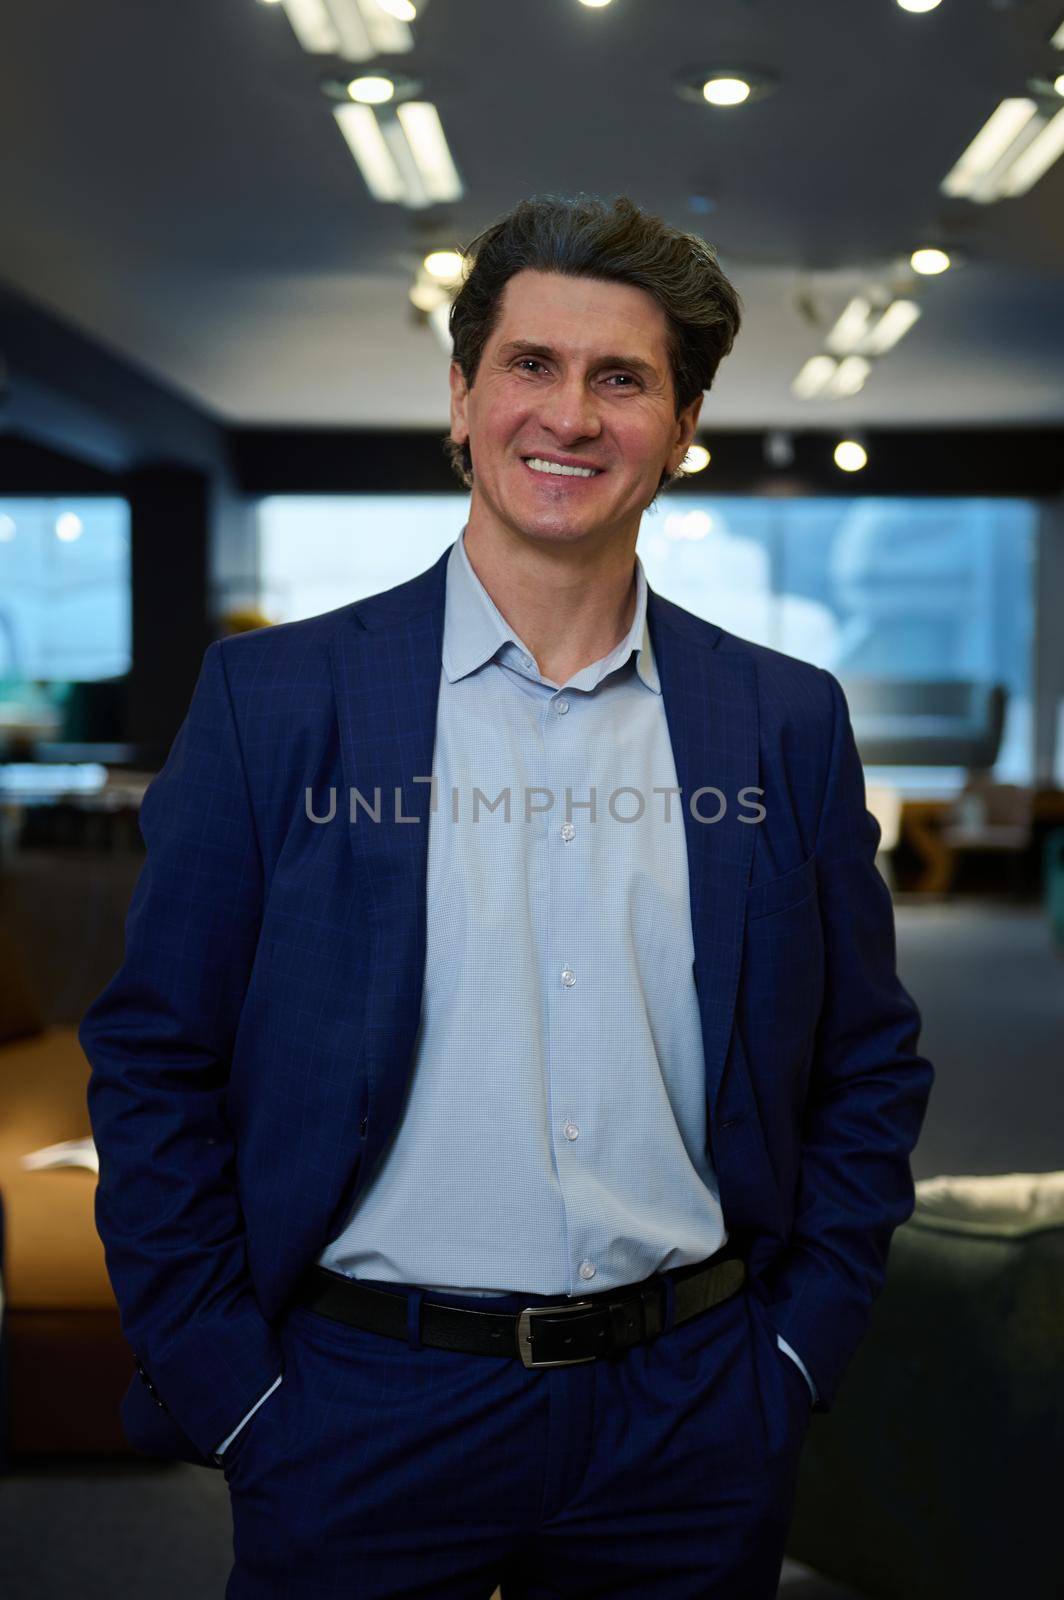 Business portrait of a handsome confident mature Caucasian man, entrepreneur, business owner, smiling with a beautiful toothy smile looking at camera